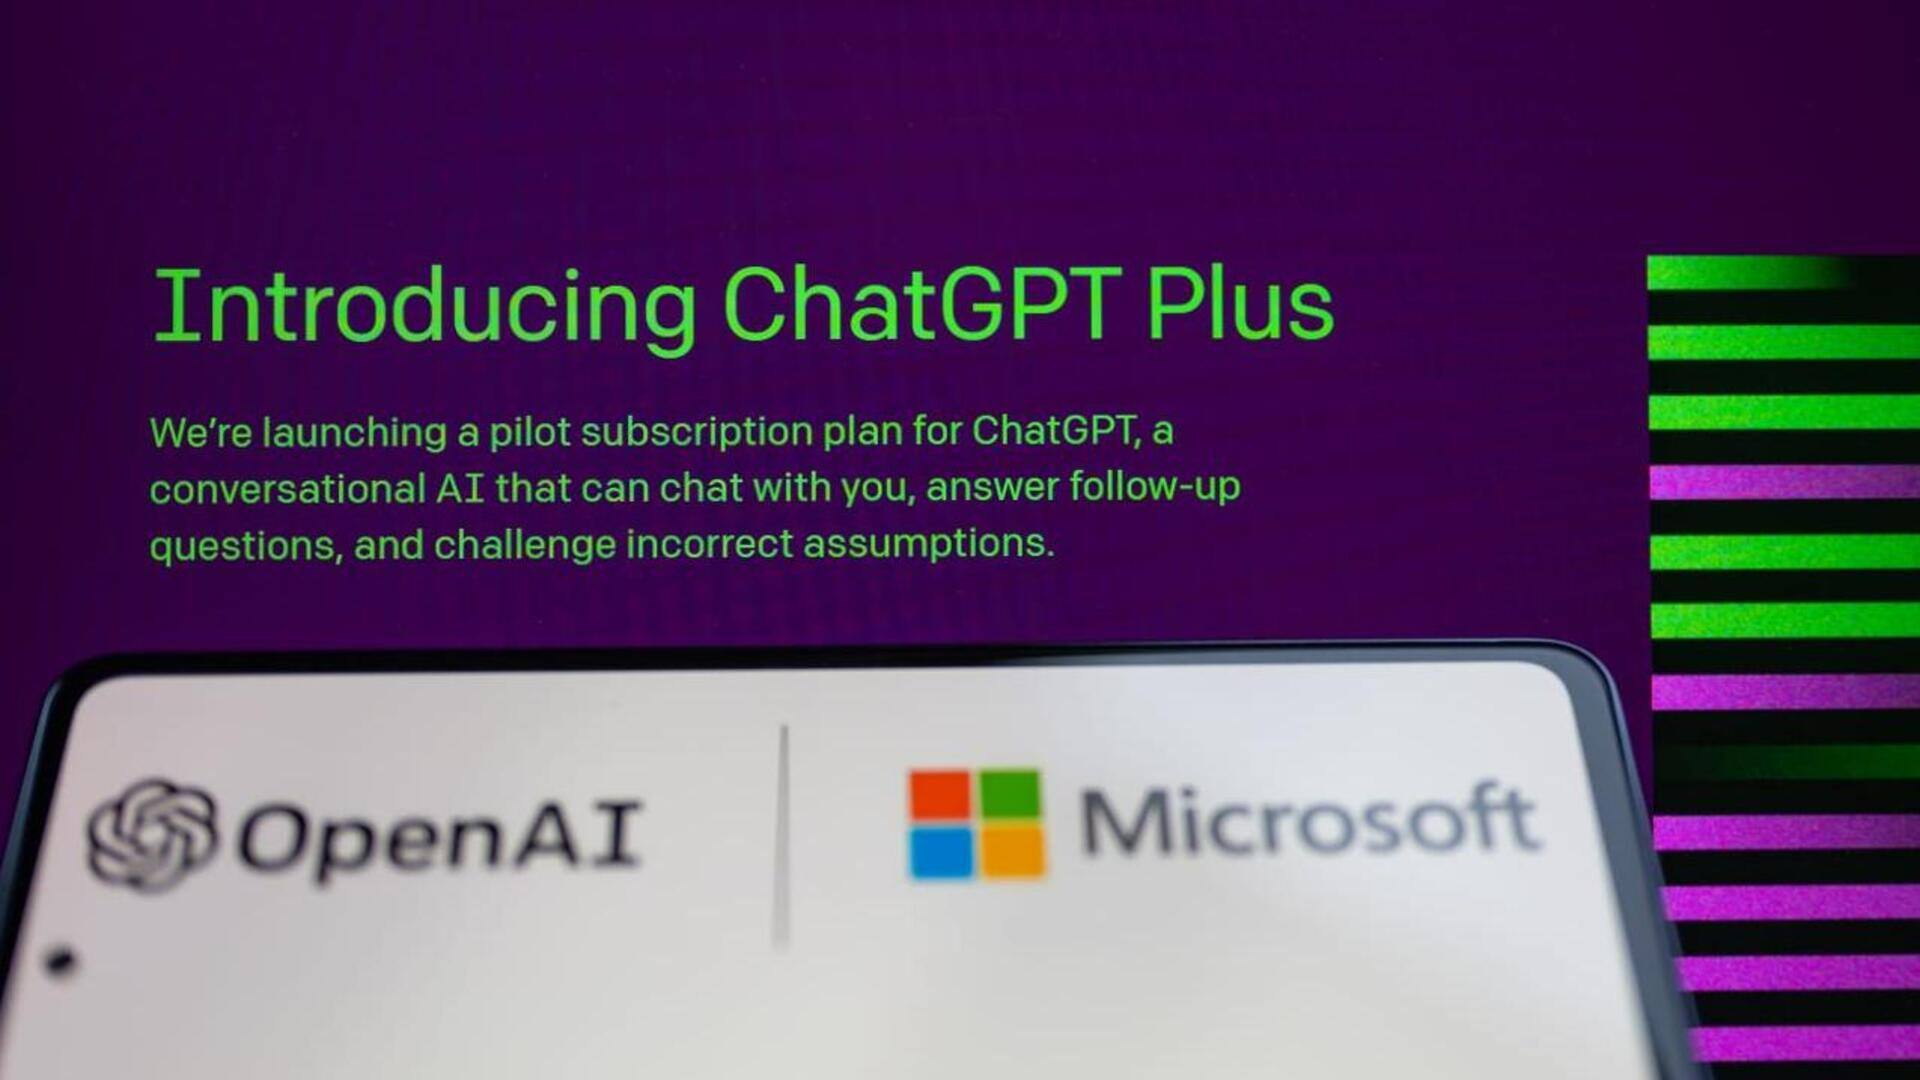 OpenAI pauses sign-ups for ChatGPT Plus due to overwhelming demand